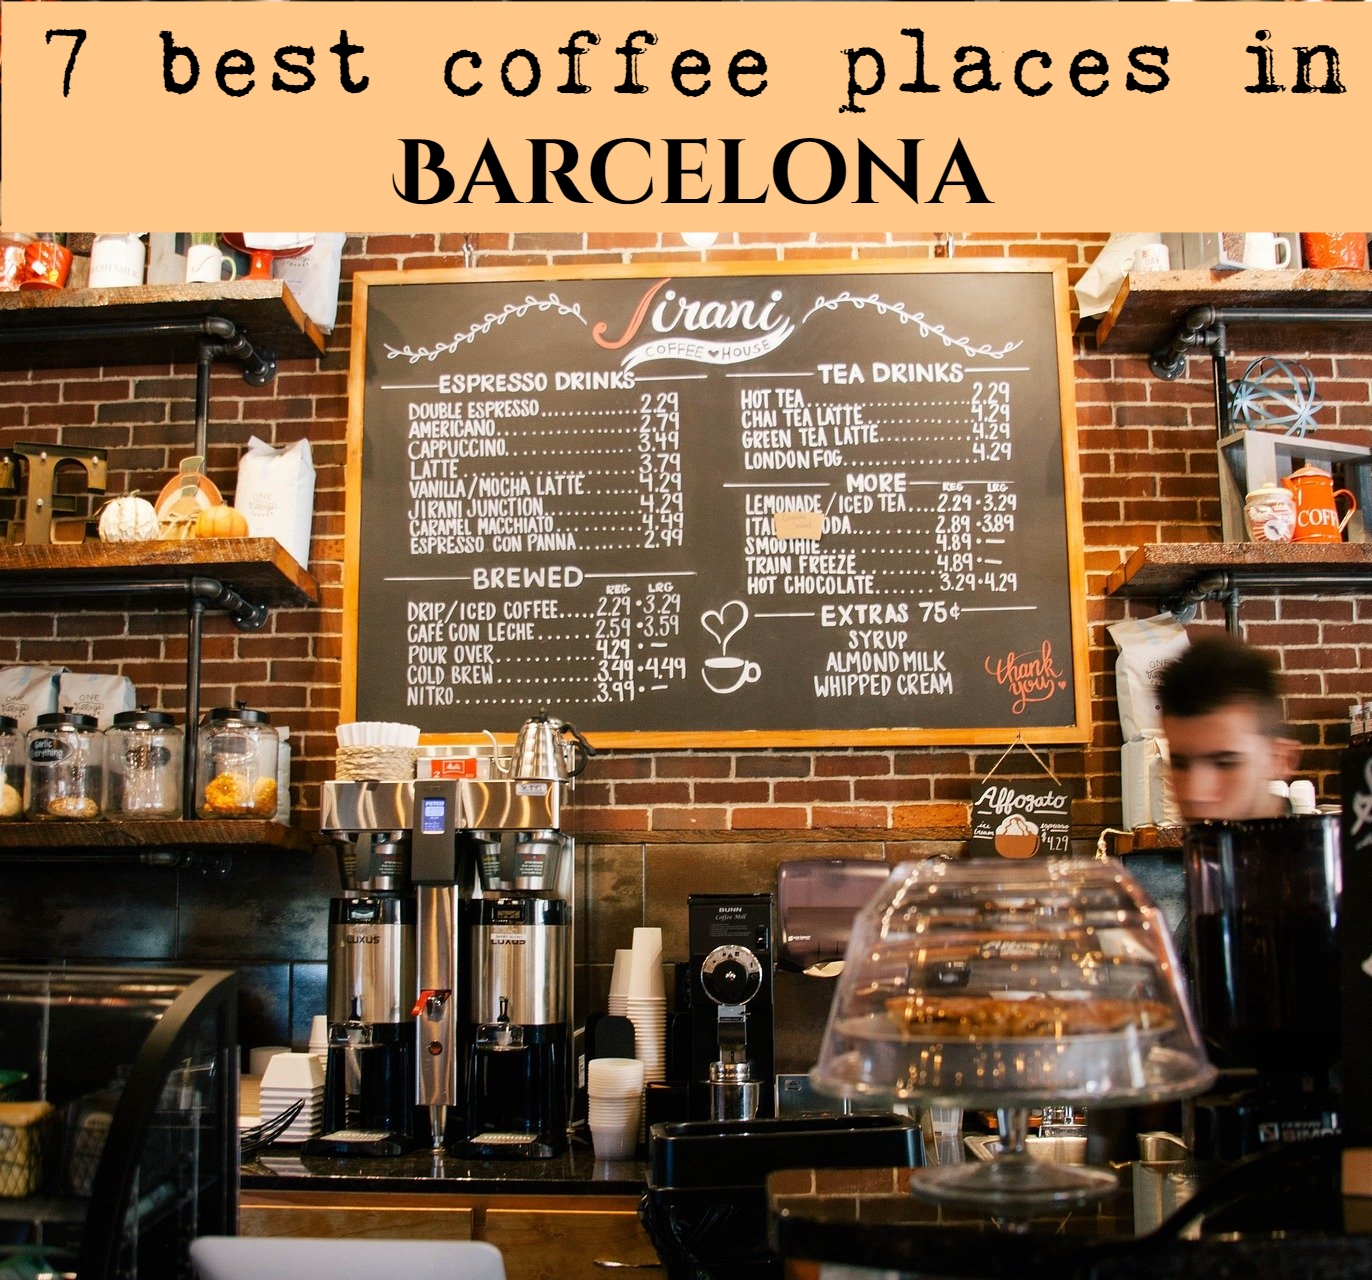 Best coffee places in Barcelona Spain (2)